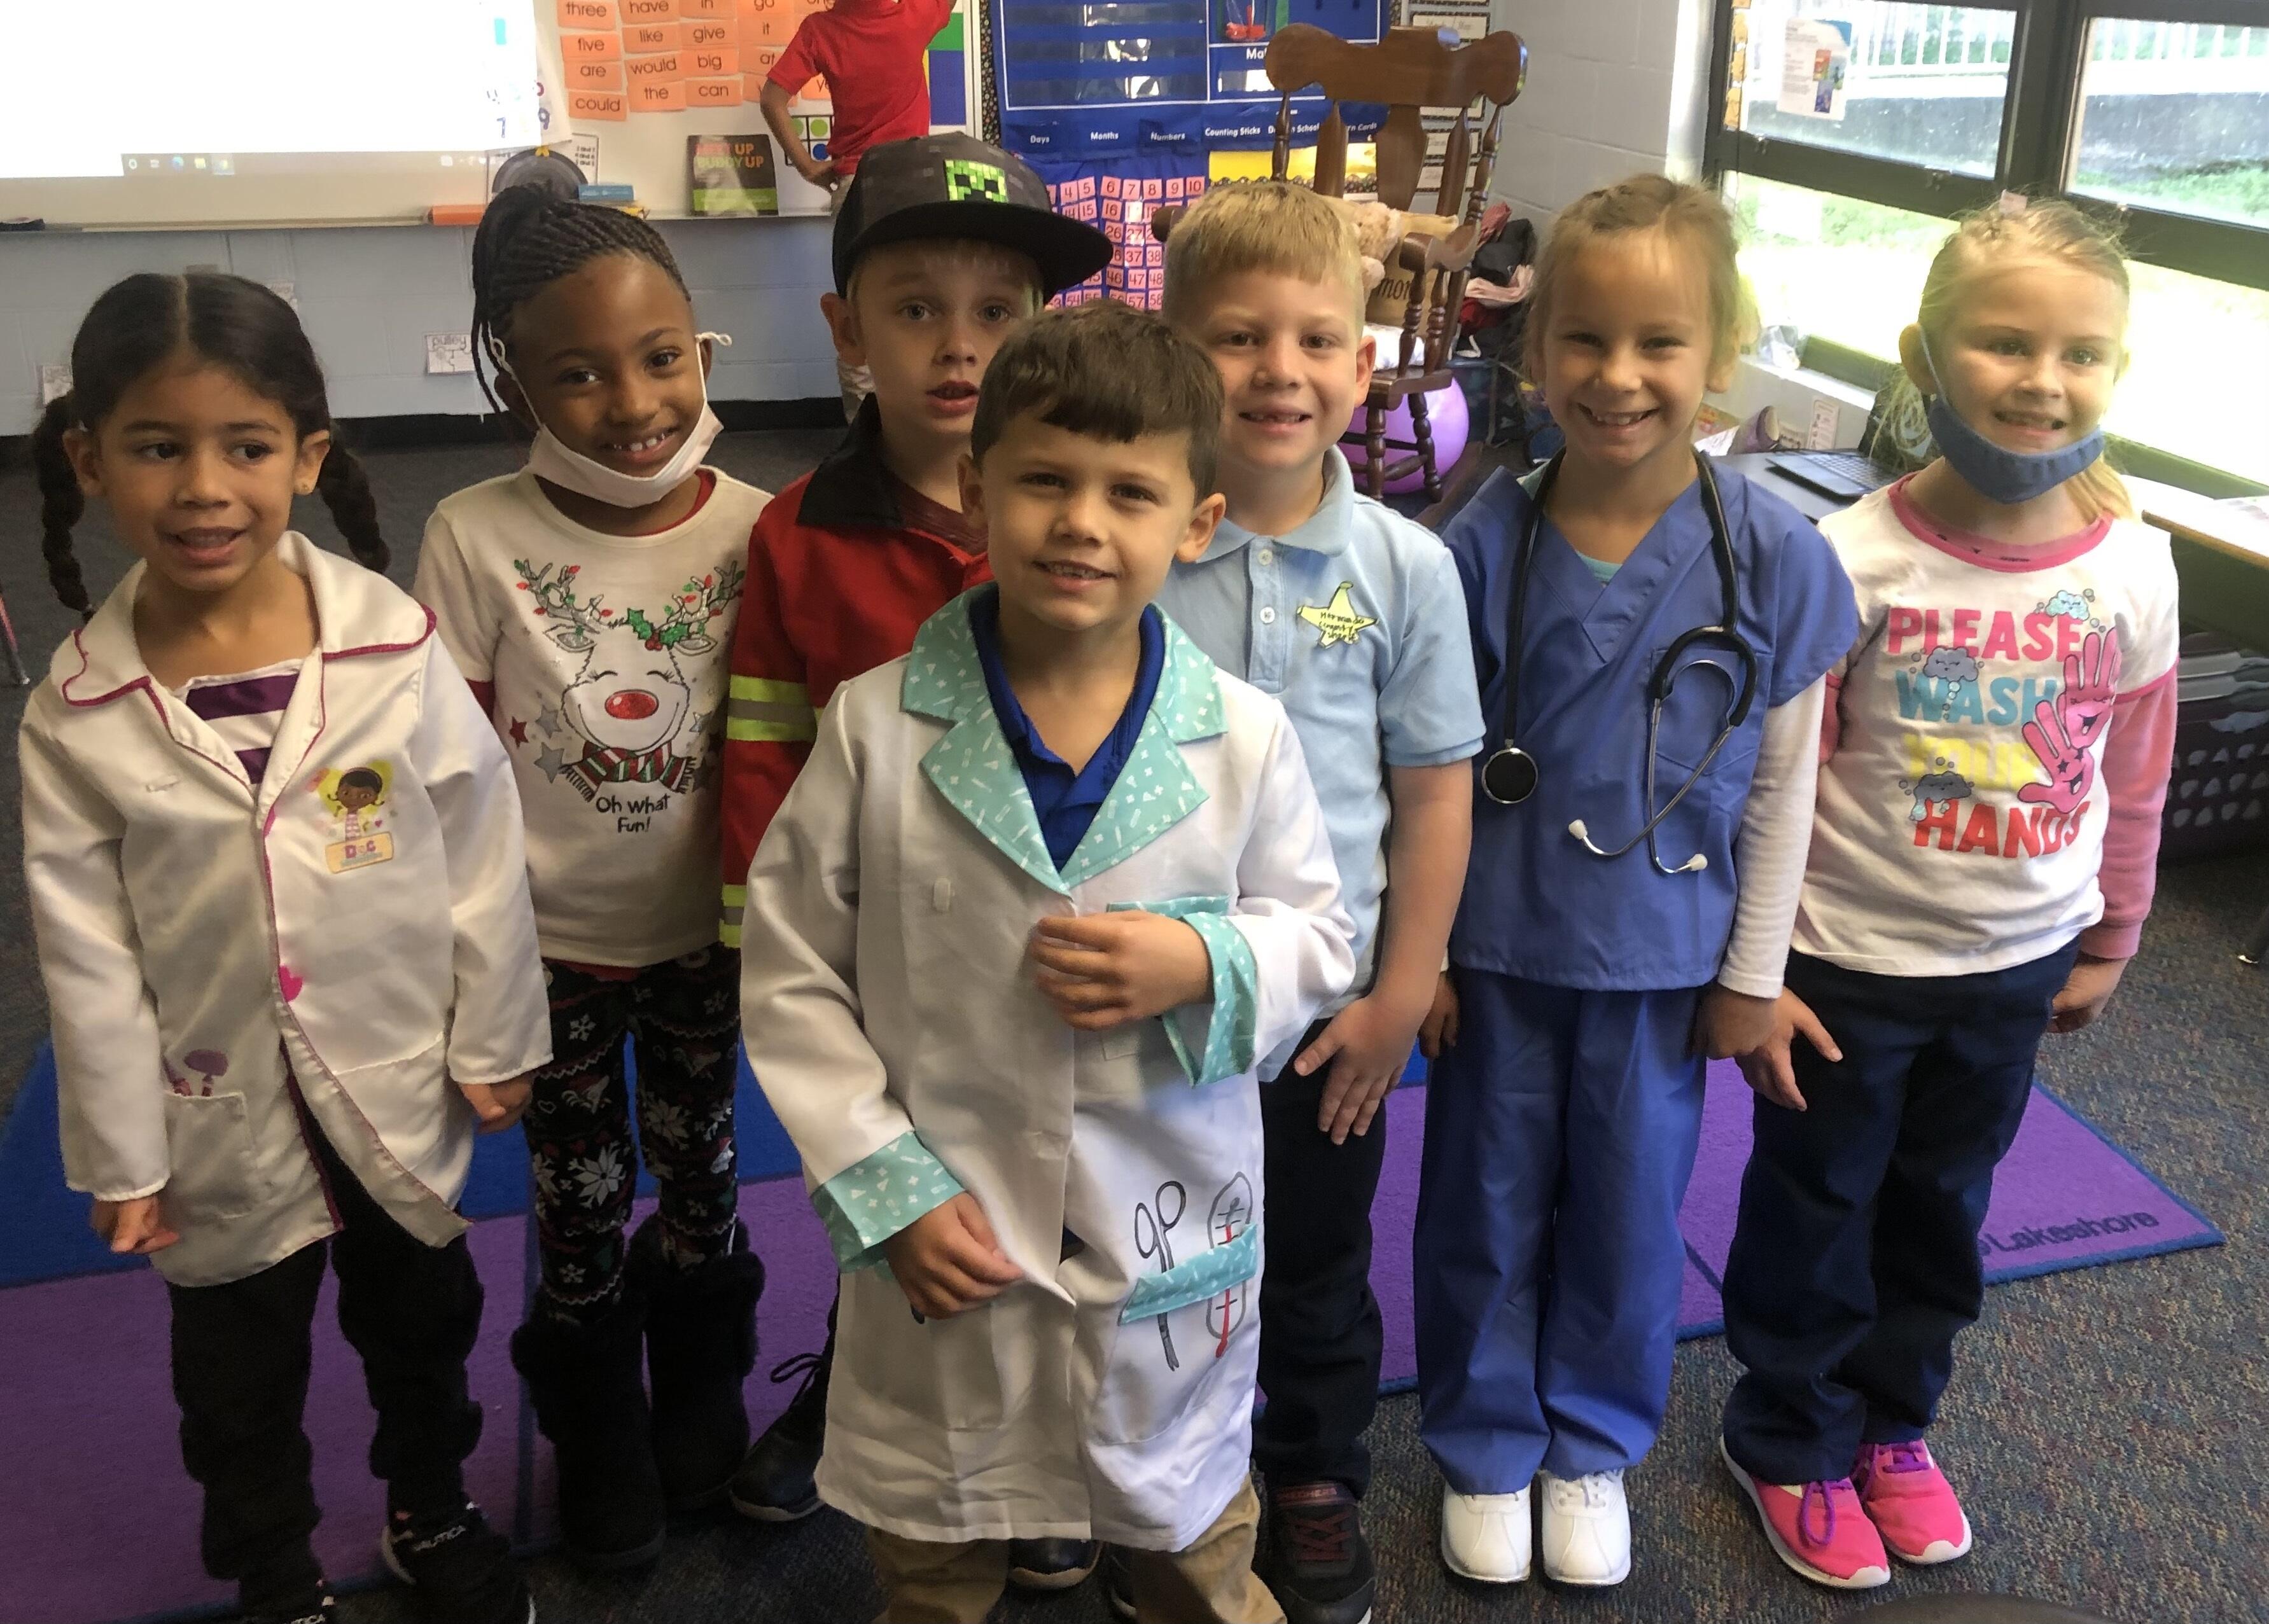 Students wearing doctor/nurse outfits